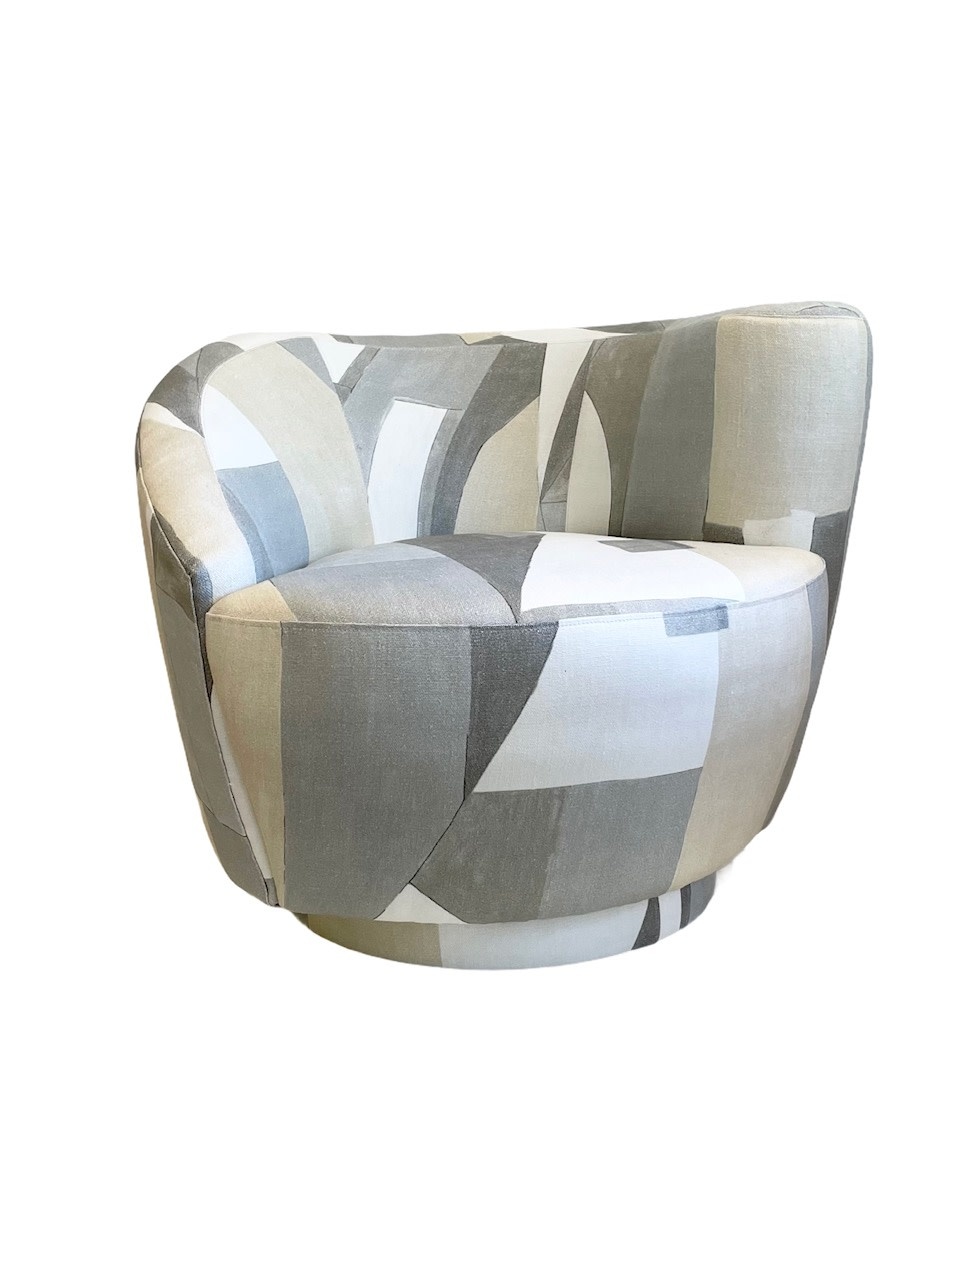 BECKER MINTY - Club Tropicana Low Right  Swivel Chair in Kelly Wearstler District Fabric Shown  in Alabaster - H75cm W91cm D88cm Seat H46cm-1